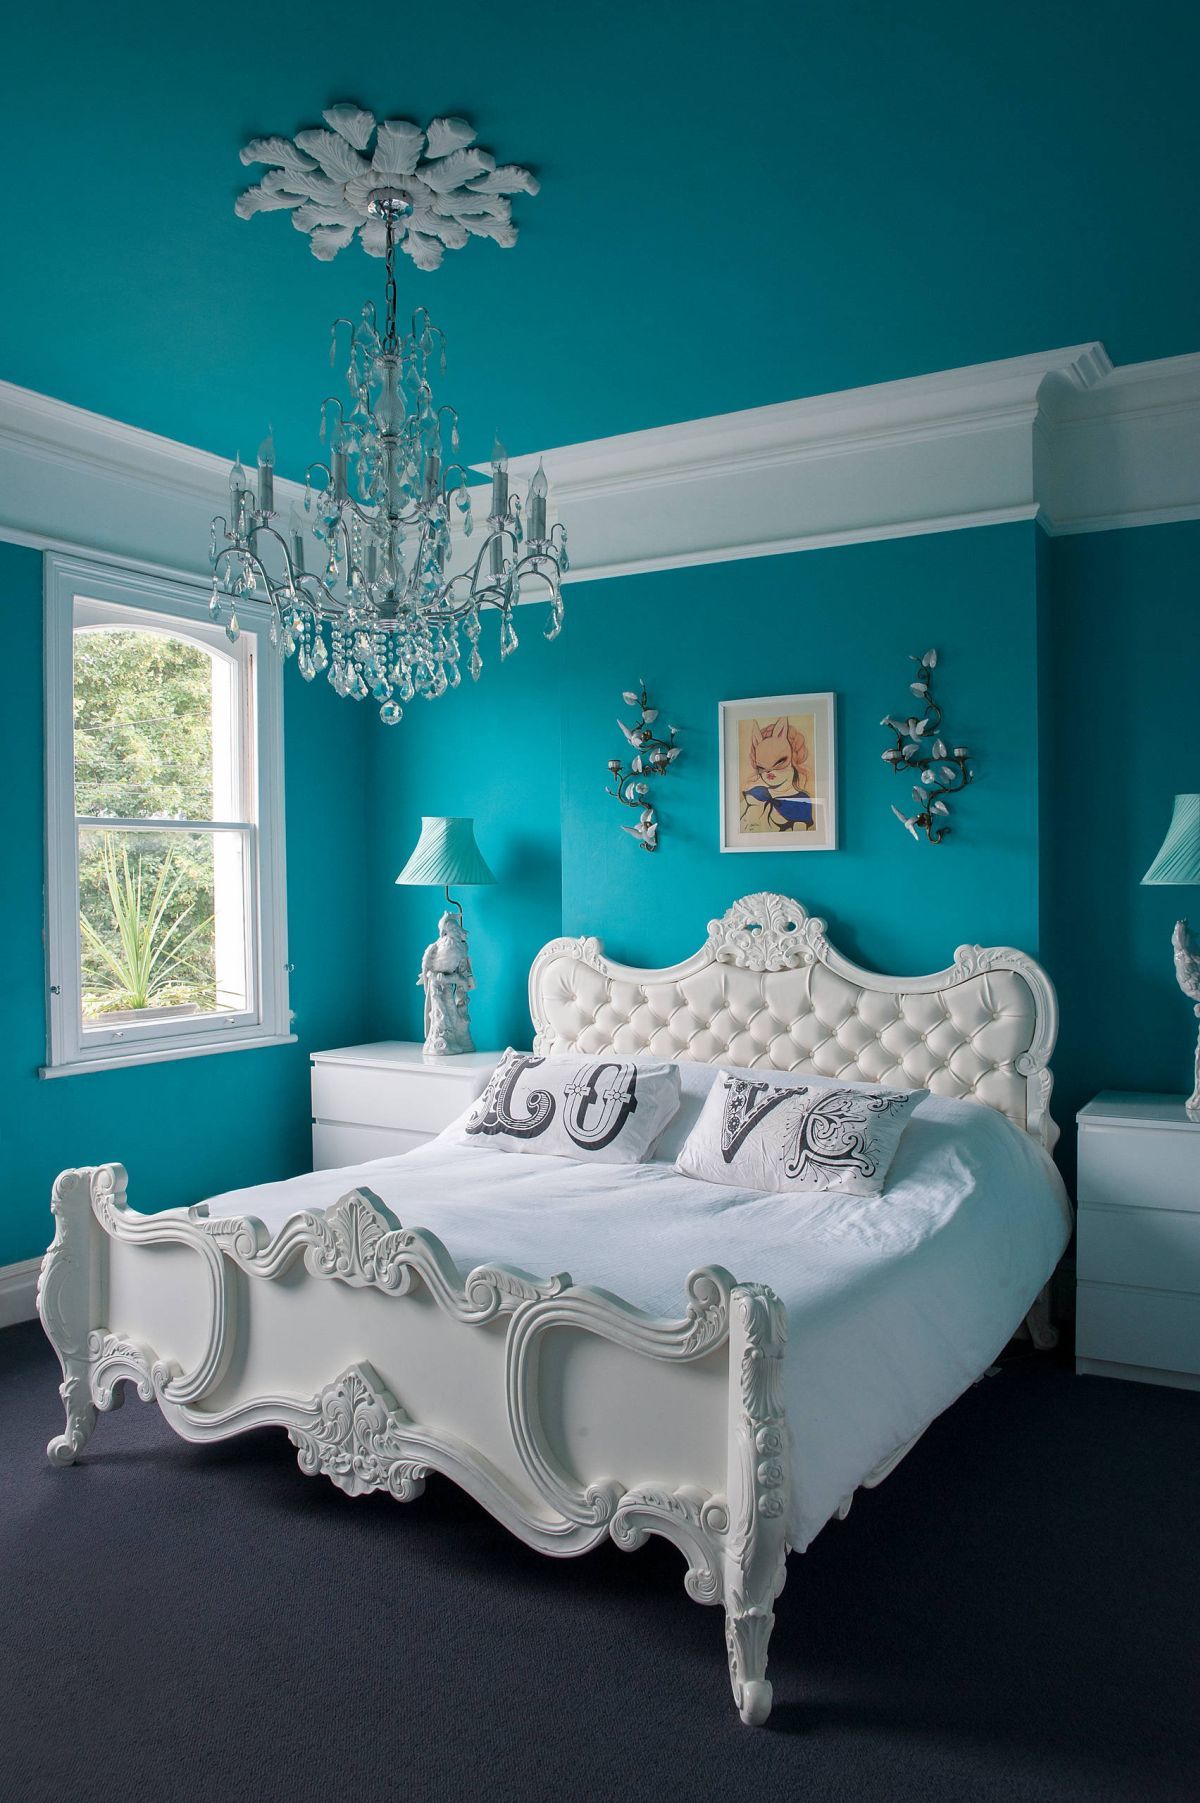 The 18 Best Paint Colors For Bedrooms   Decor Report